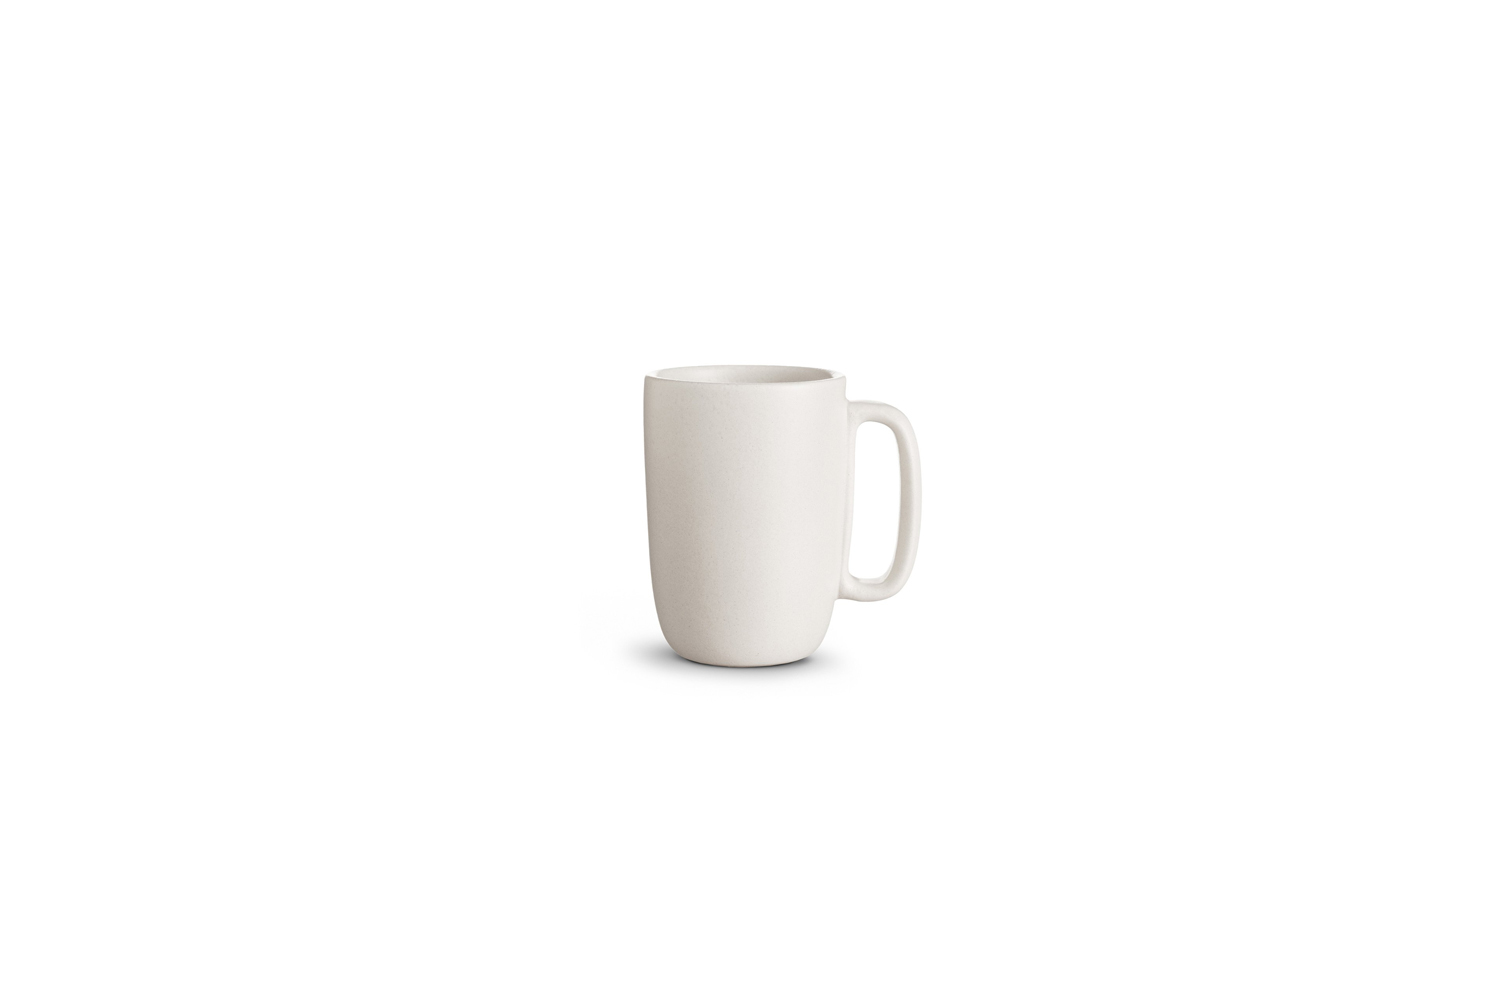 from the chez panisse line by heath ceramics, the large mug is \$4\1. 9